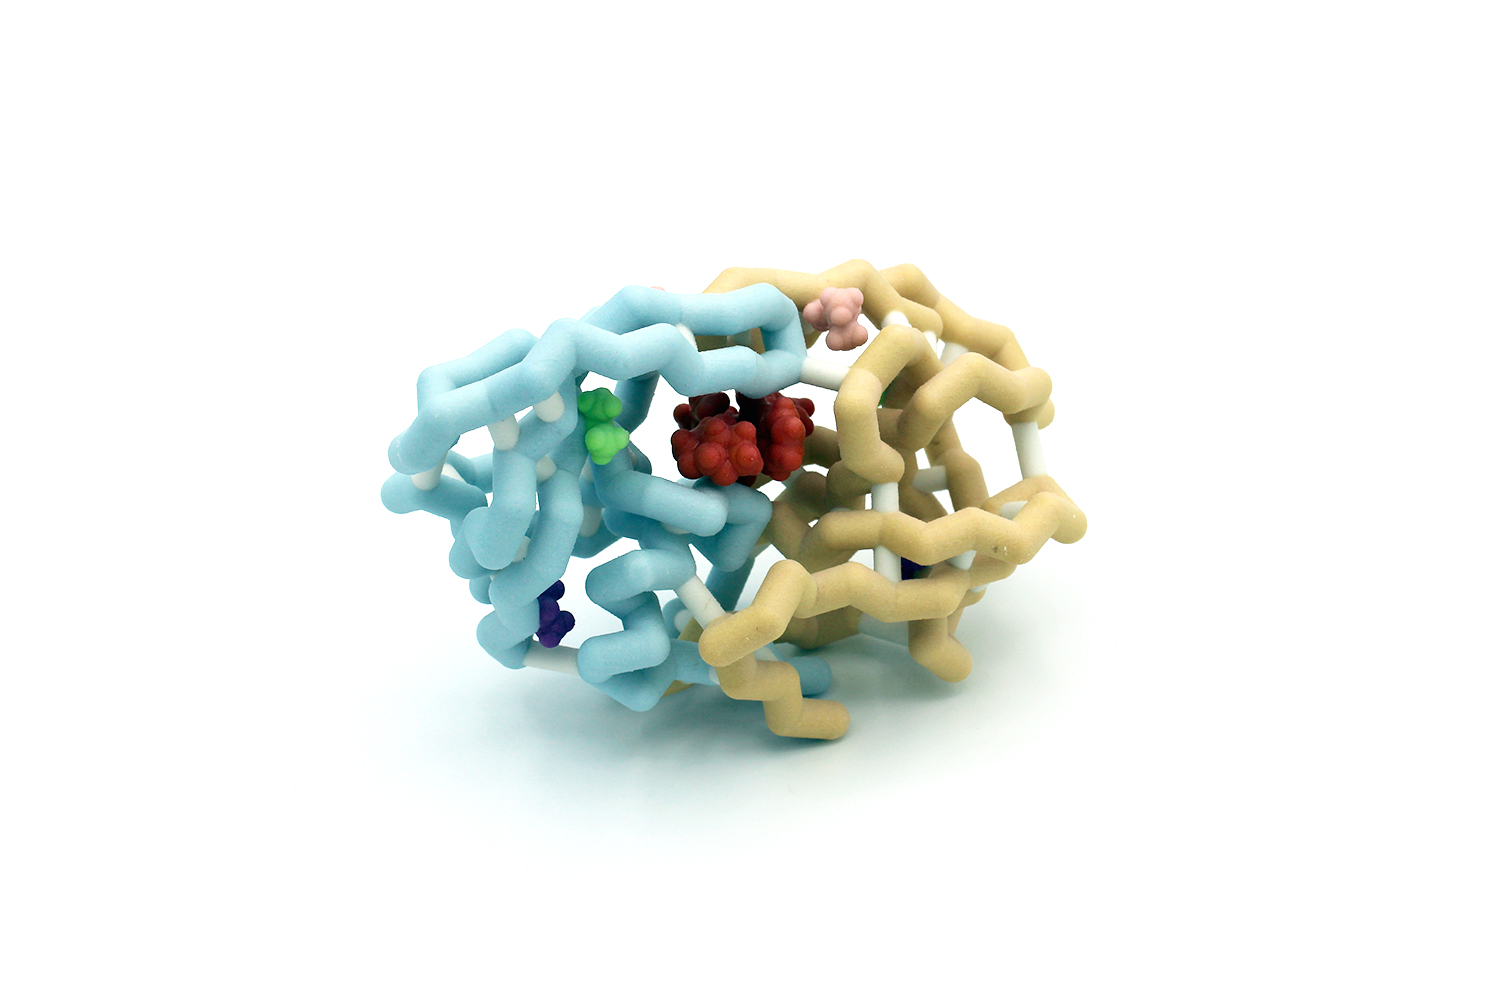 Physical model of HIV Protease